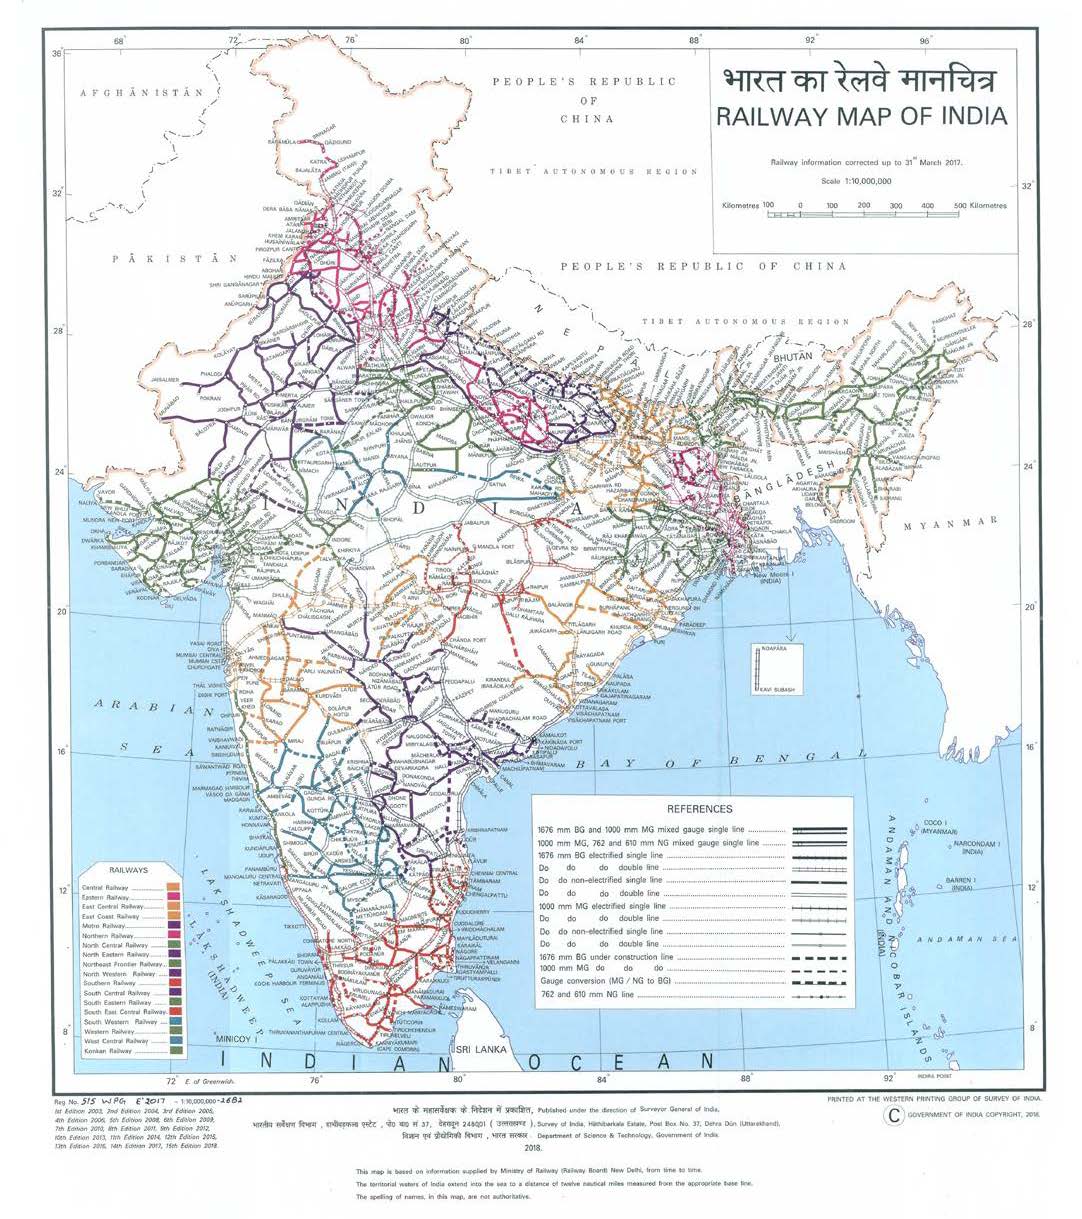 Fig 1: Railway Map of India